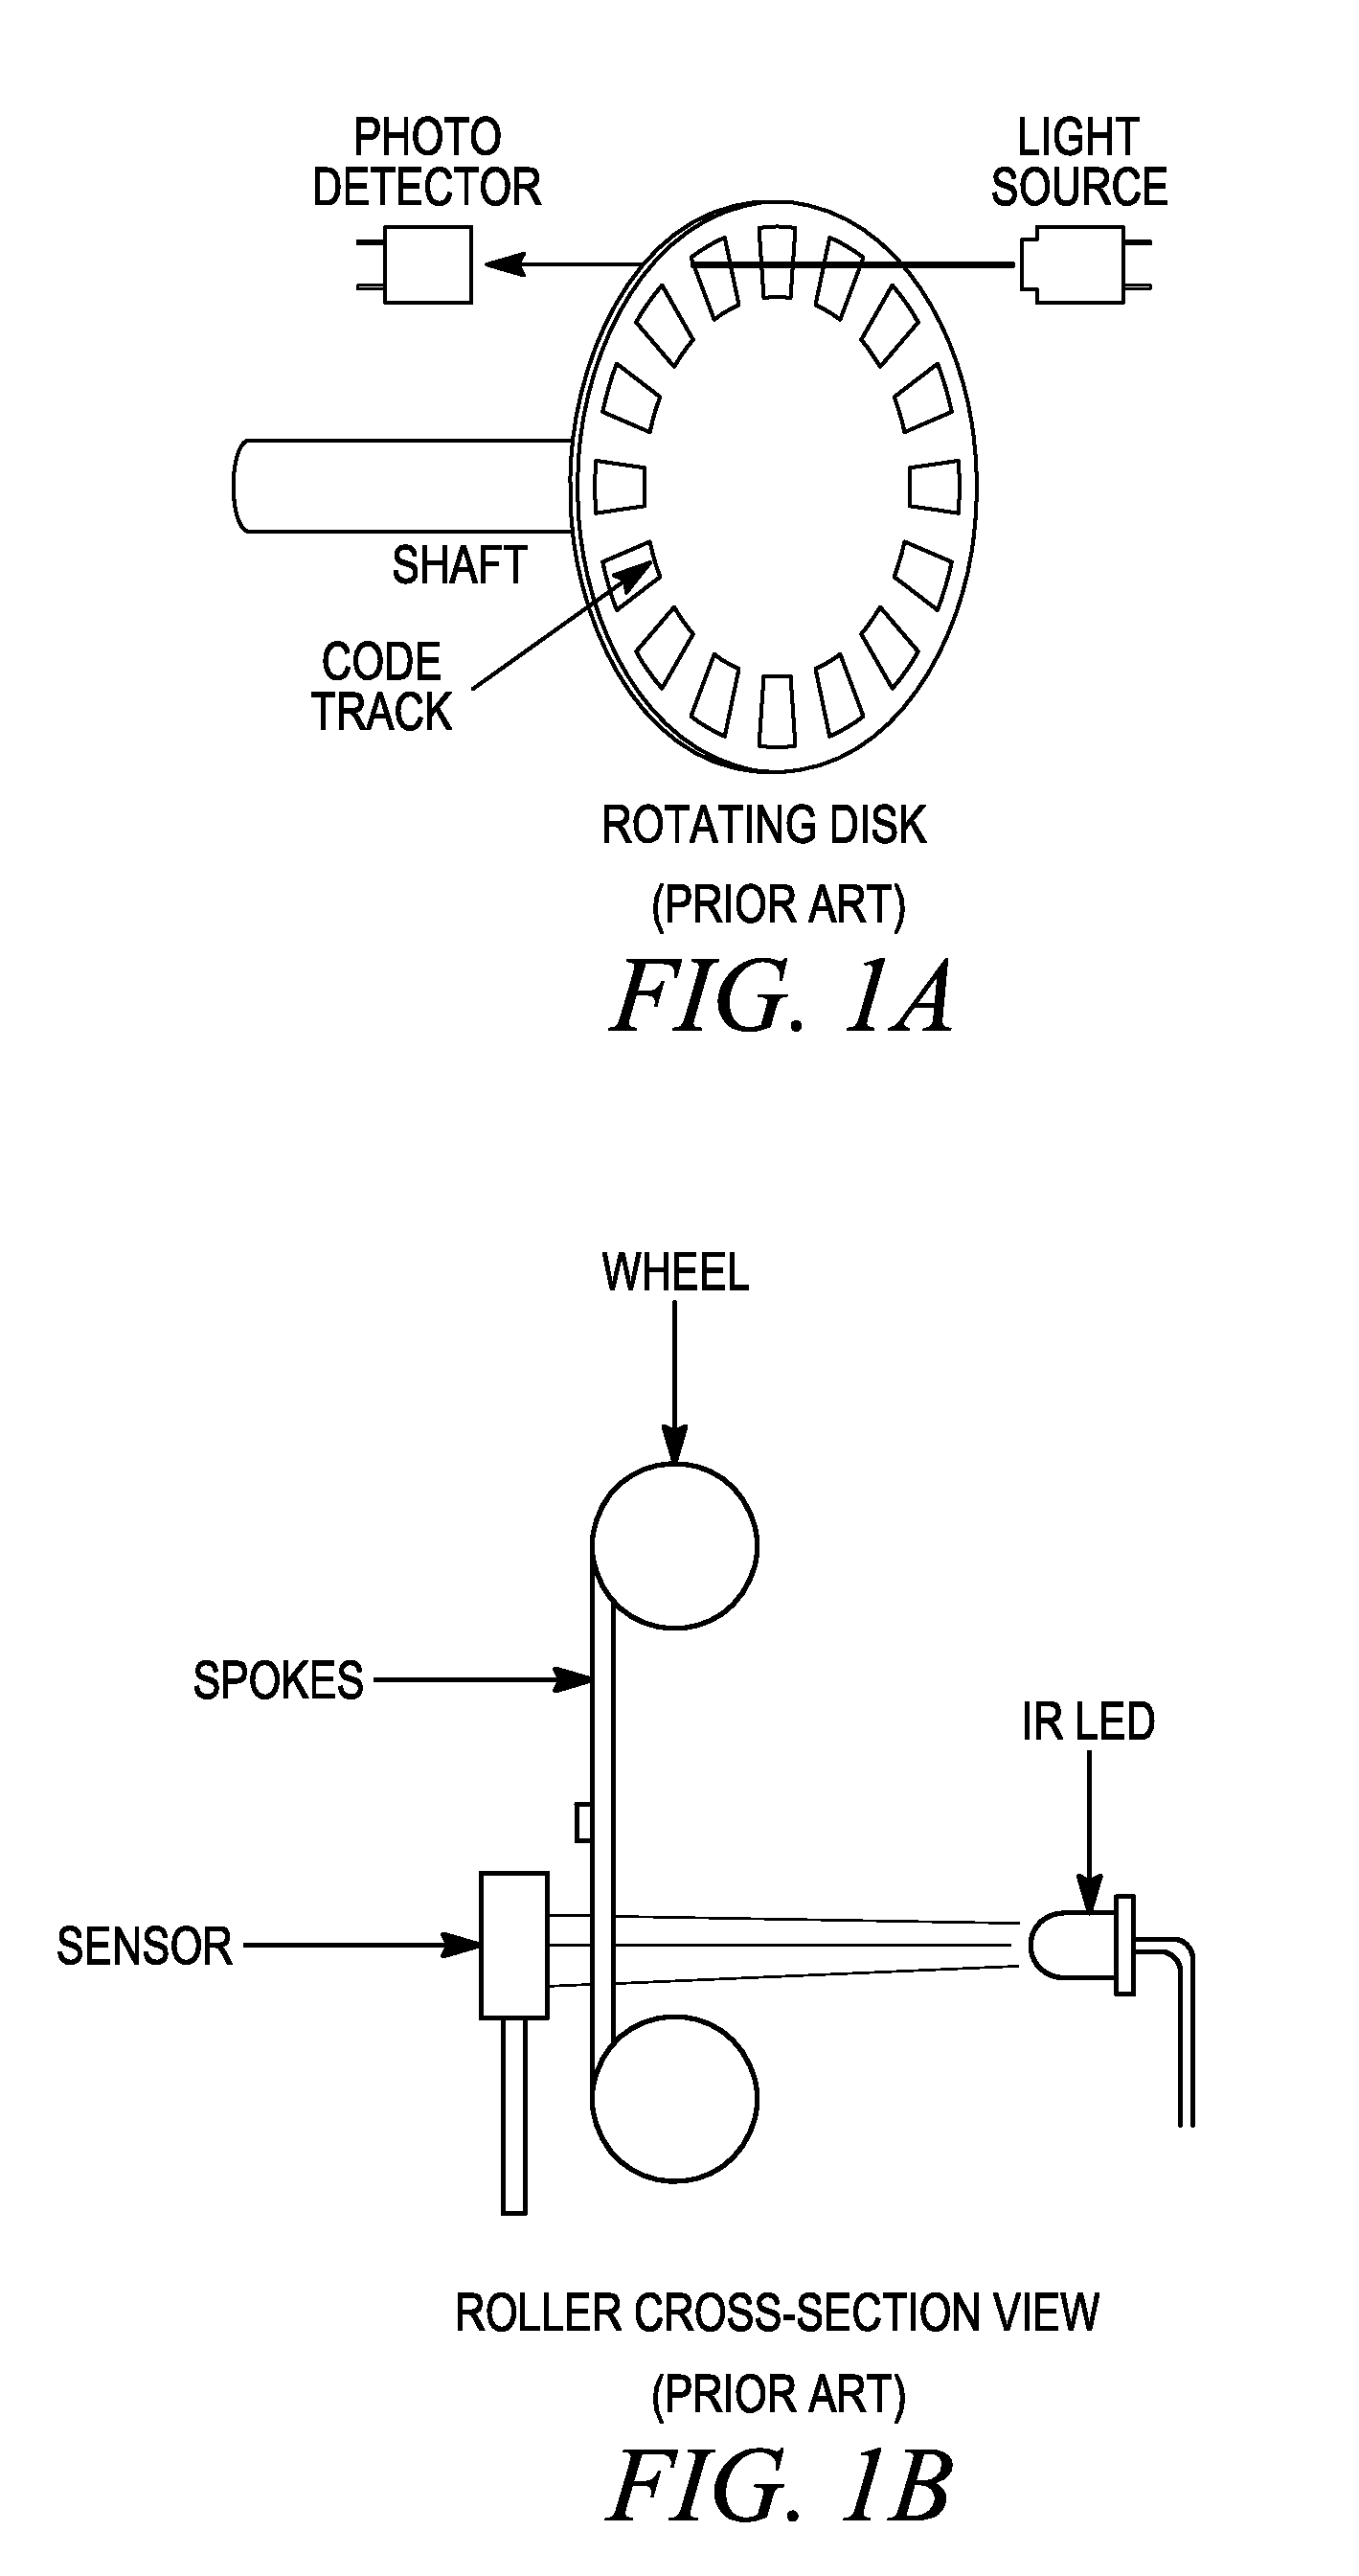 Magnetic rotary system for input devices